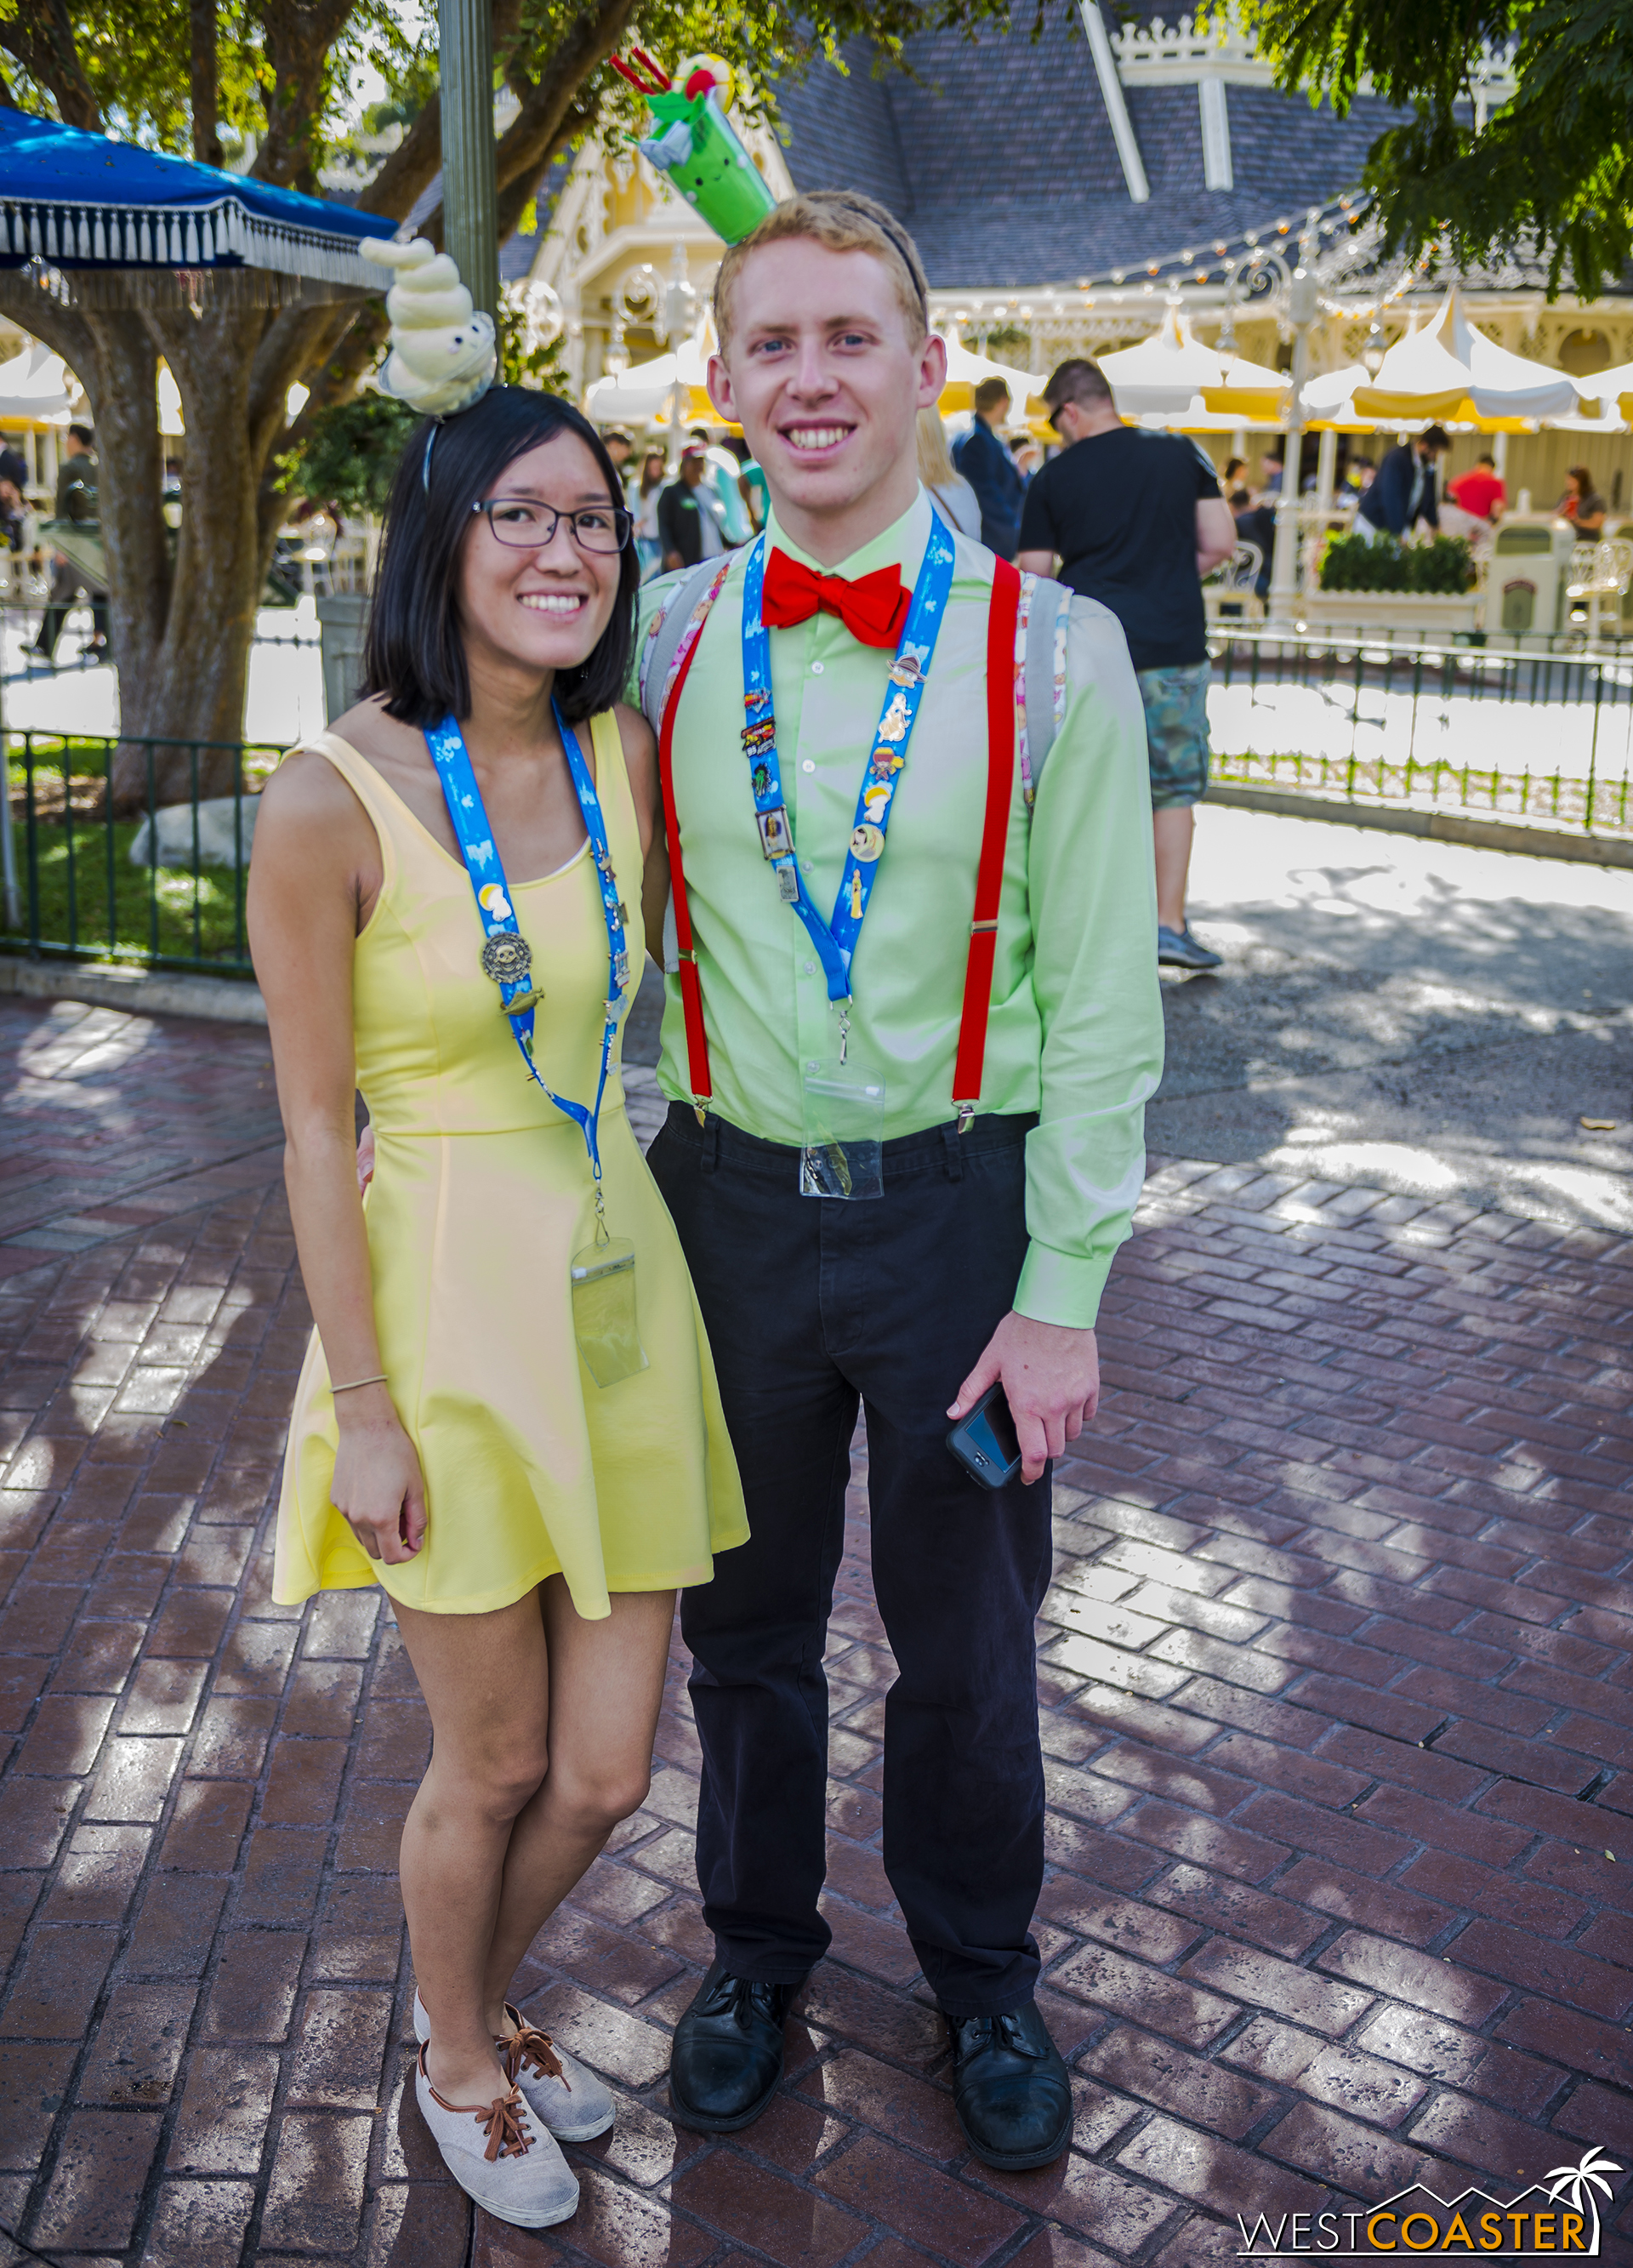  This couple Disney Bounded as the Jerrod Mayuyama Kingdom of Cute versions of Dole Whip and Mint Julep! 